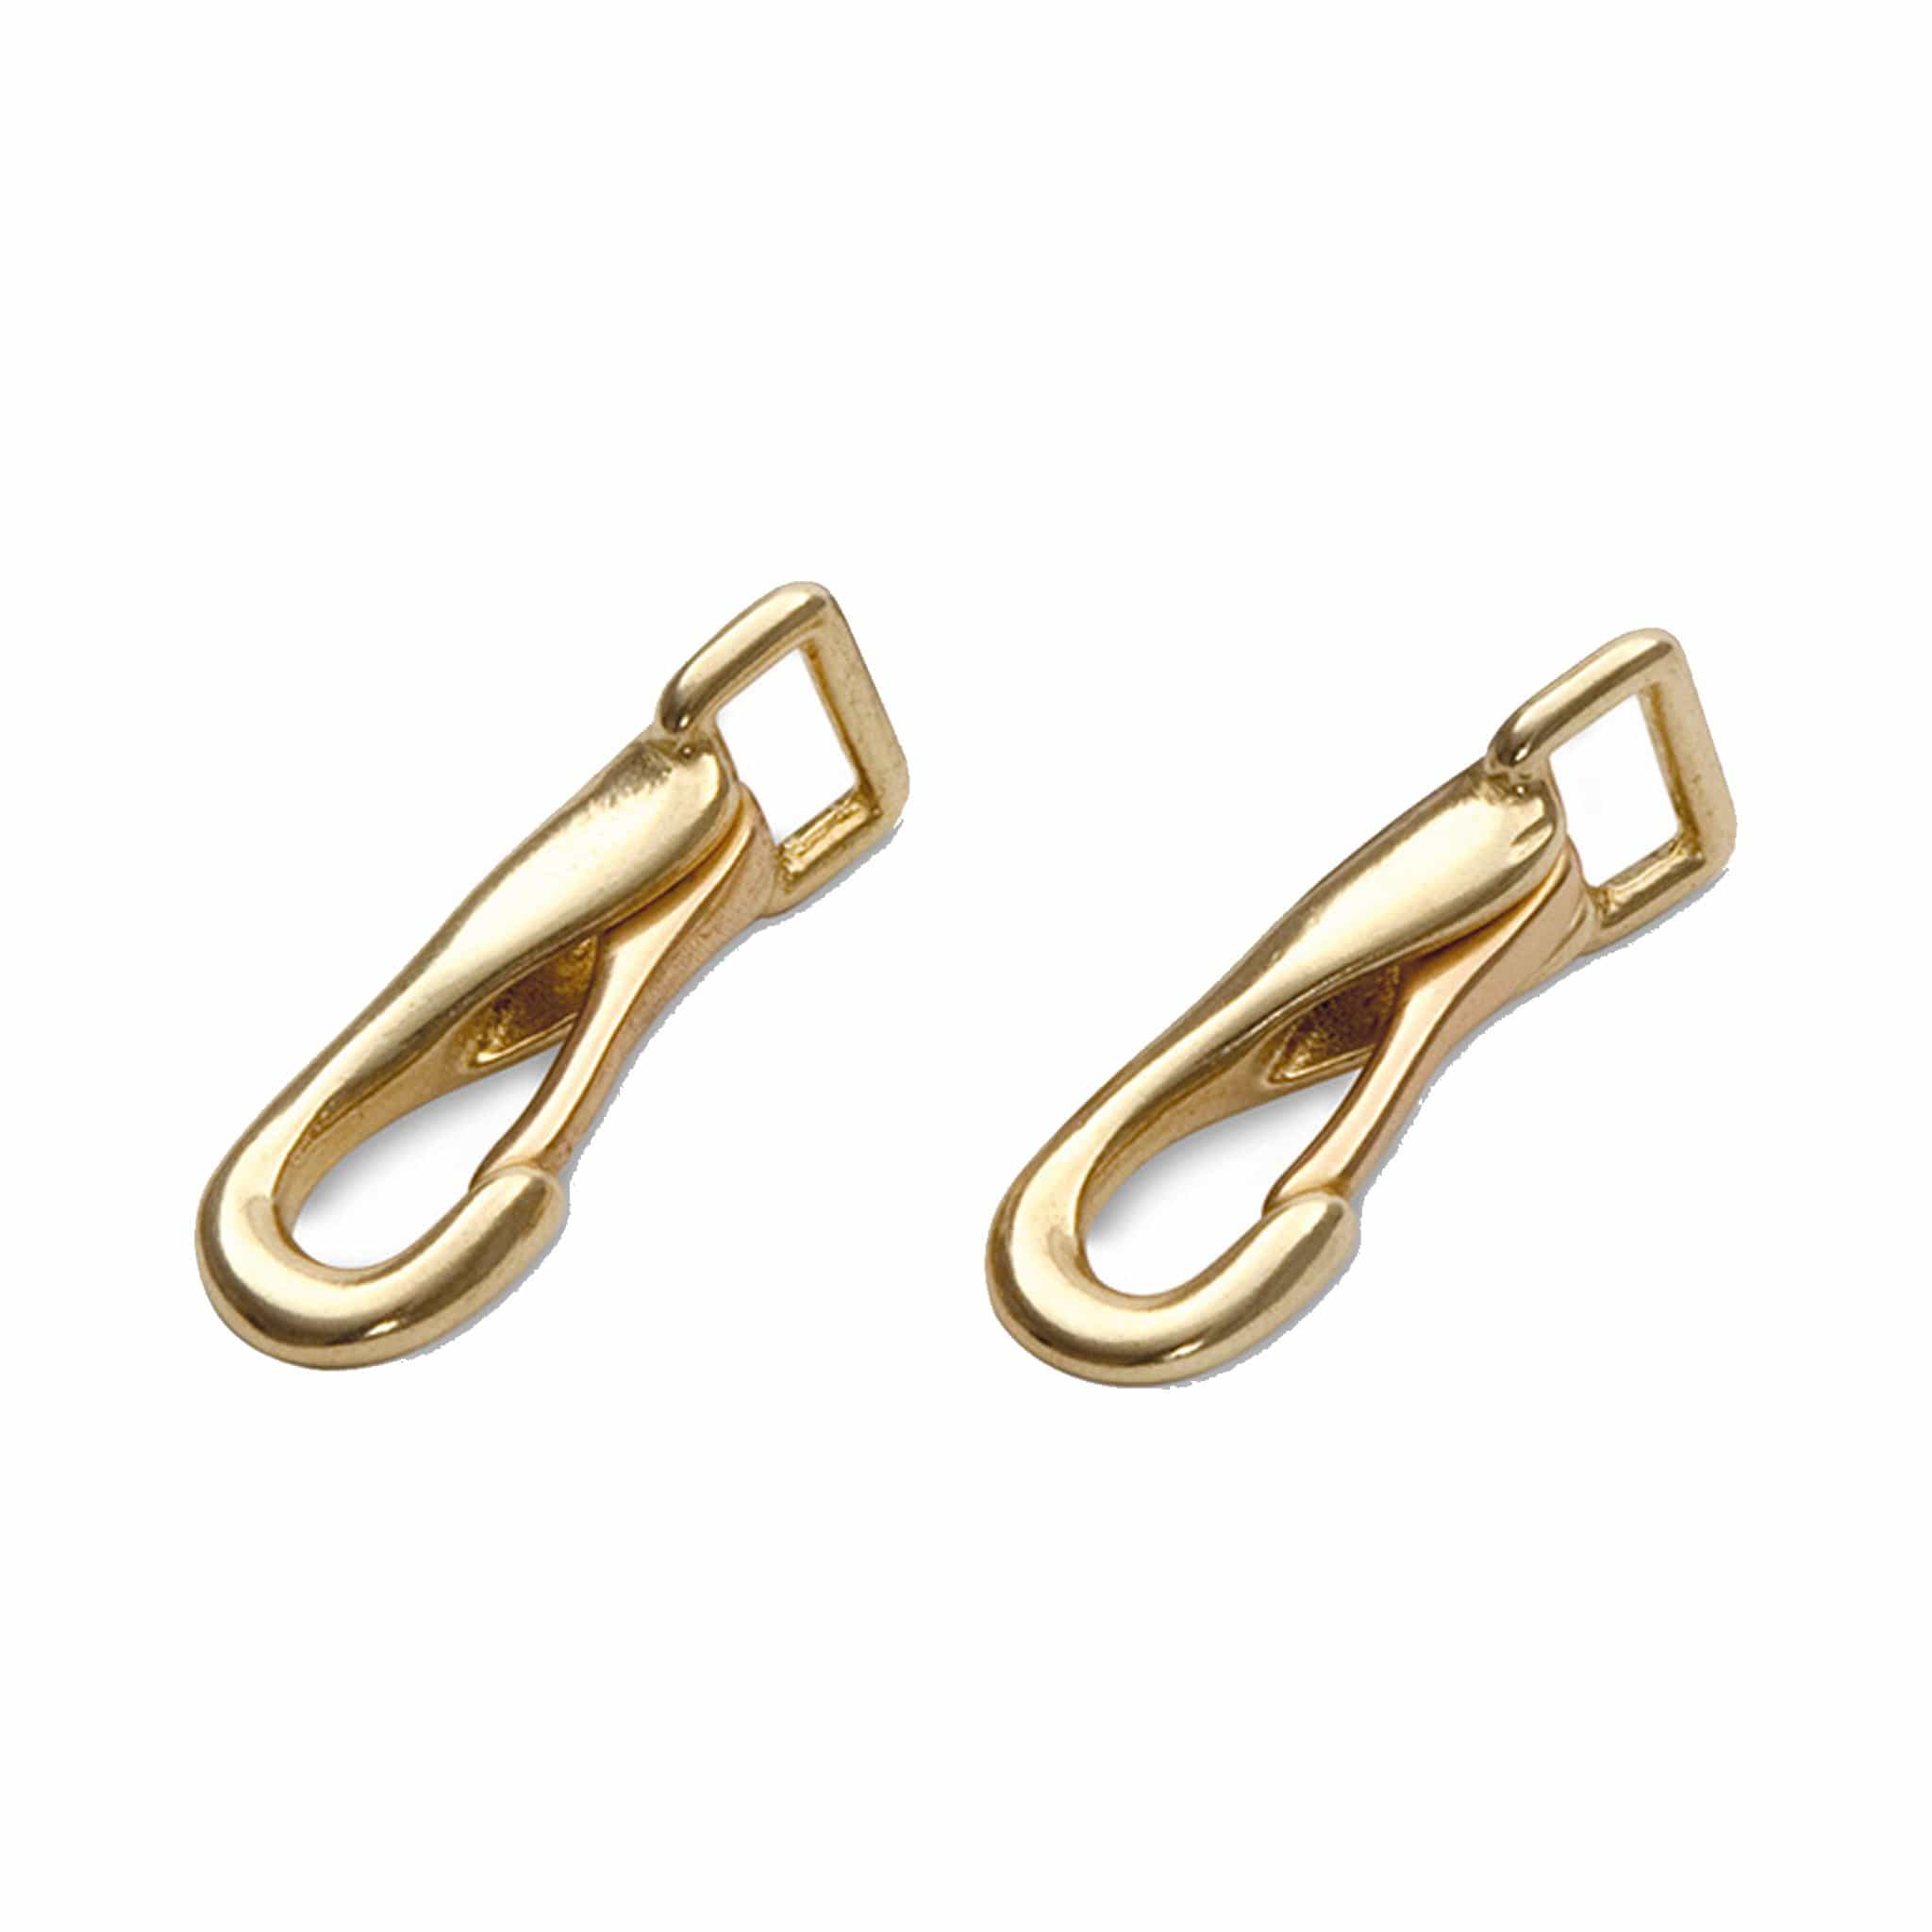 Shires Bridle Cheek Clips Brass 337C